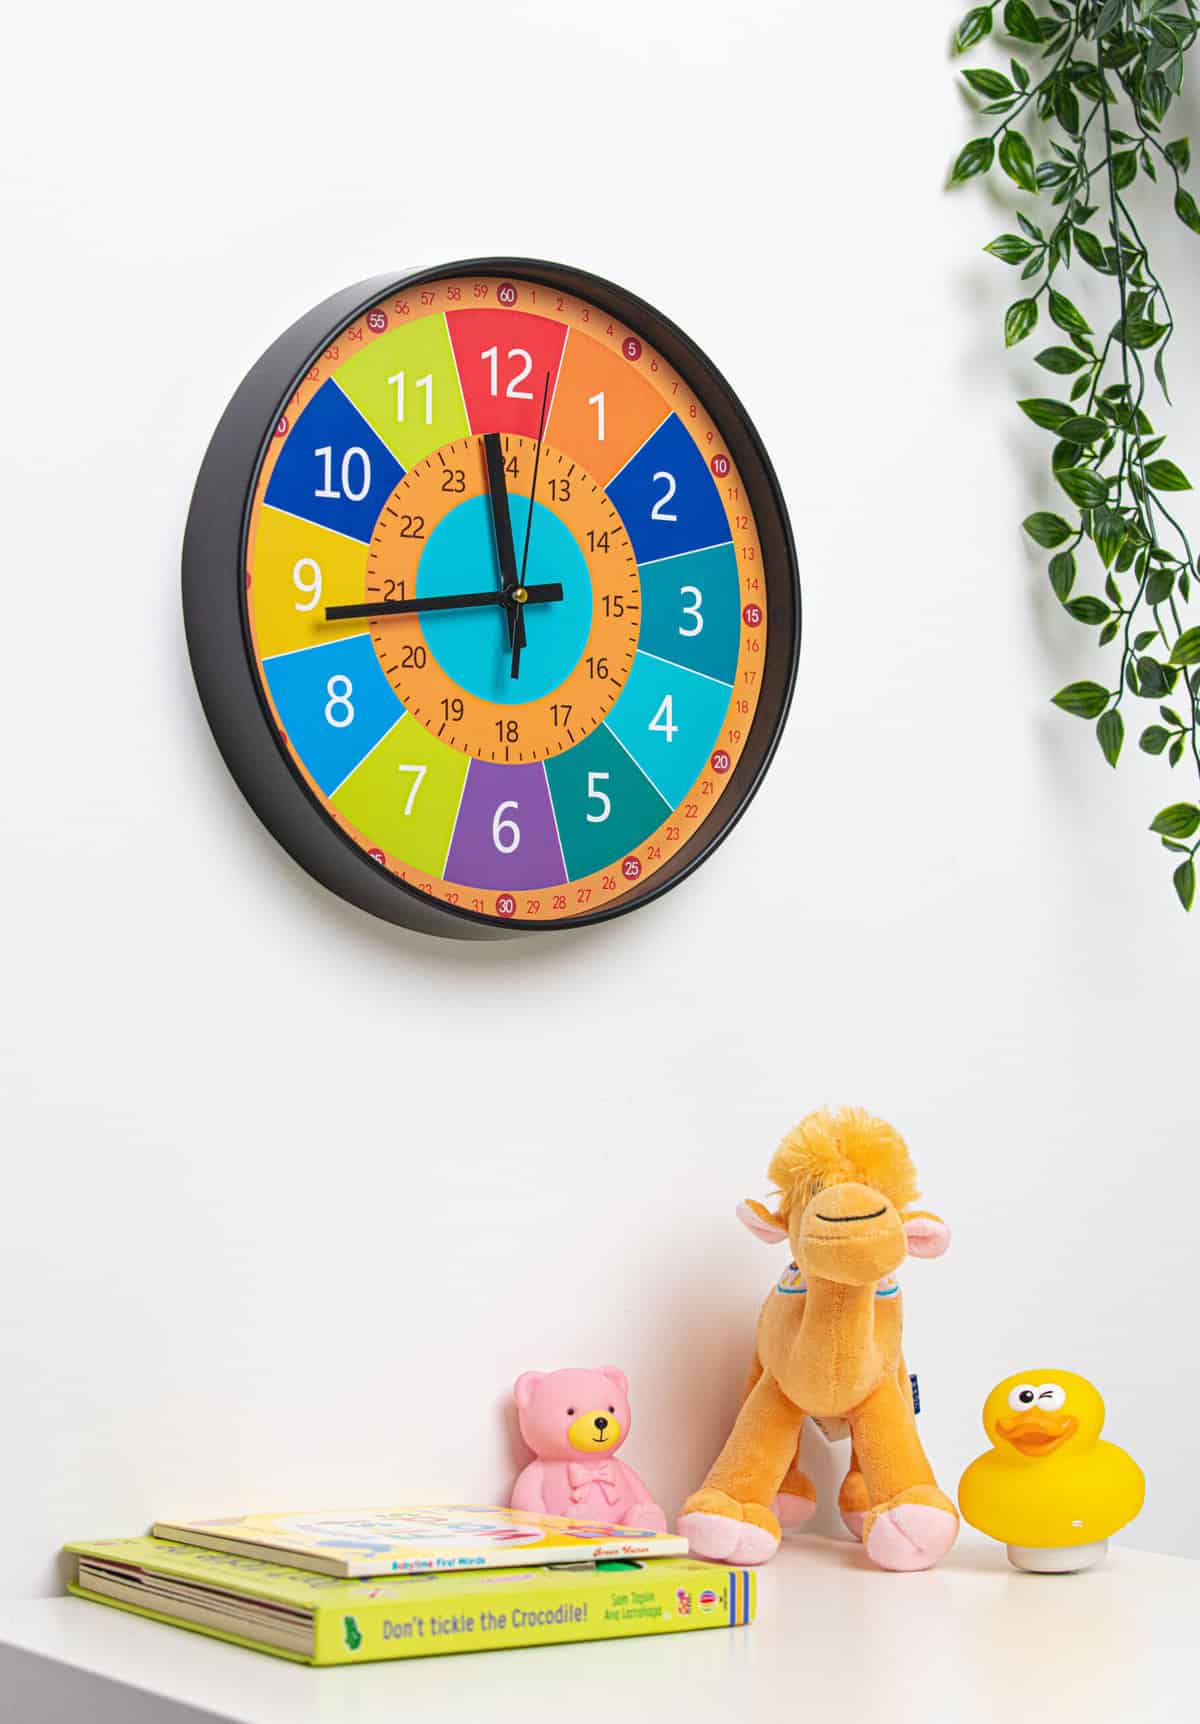 Wall Clock Black Numbers on Yellow Face 30cm